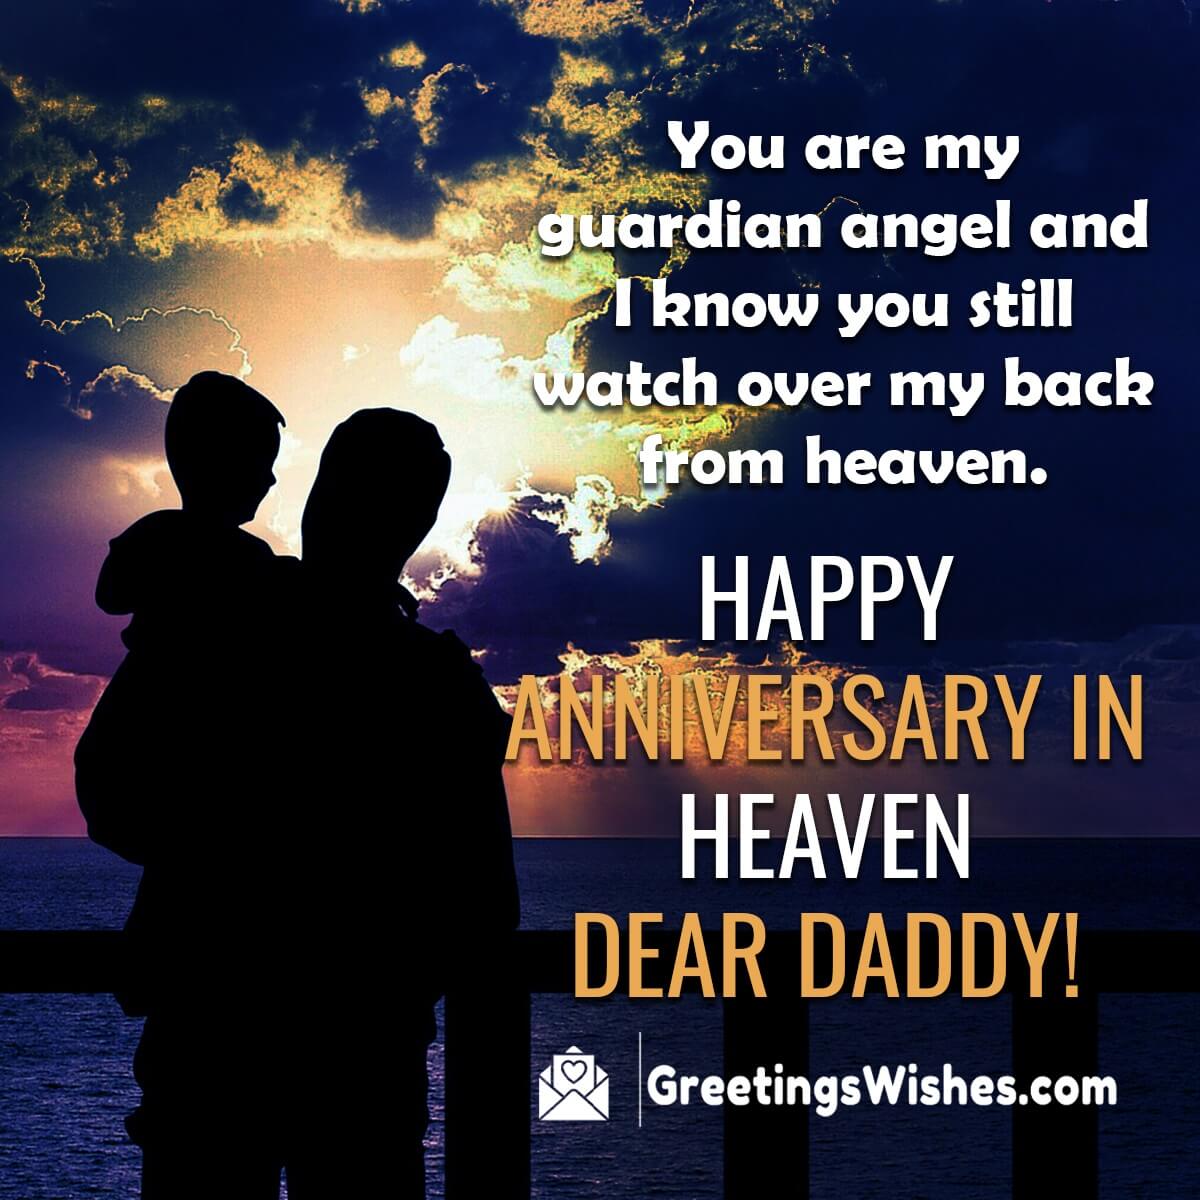 Happy Anniversary In Heaven Message For Daddy